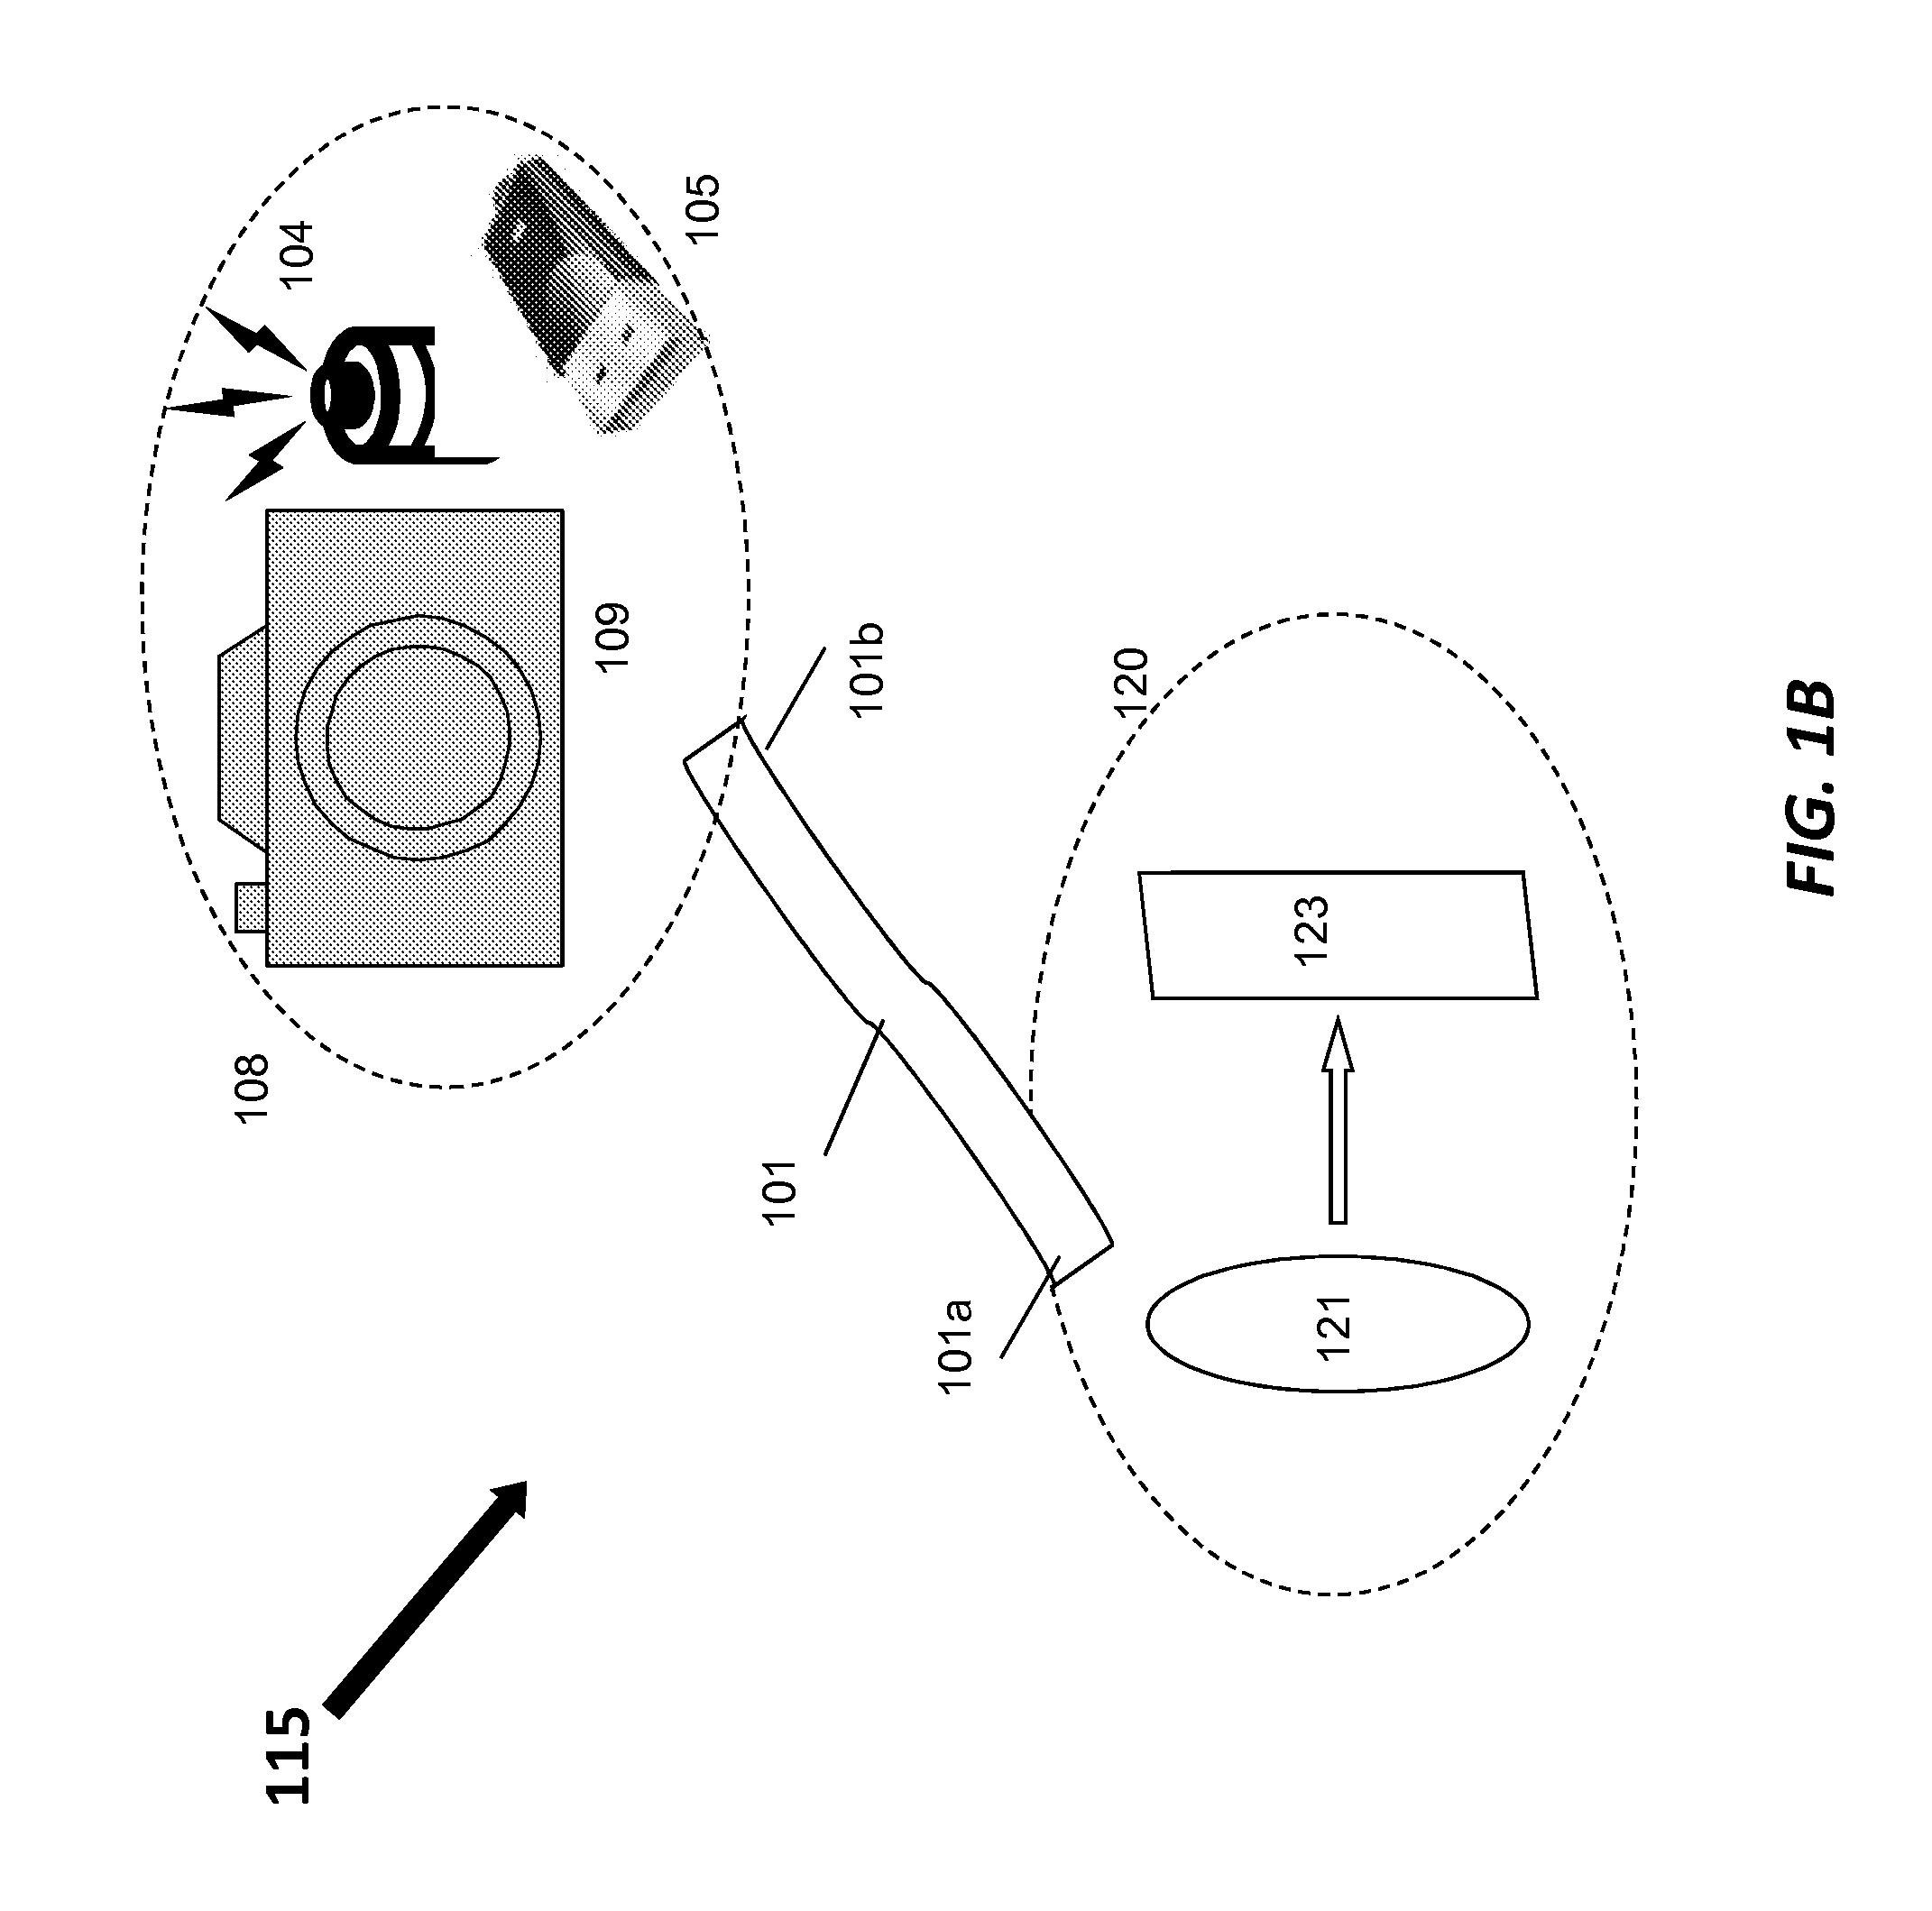 Apparatus and methods for stabilization and vibration reduction